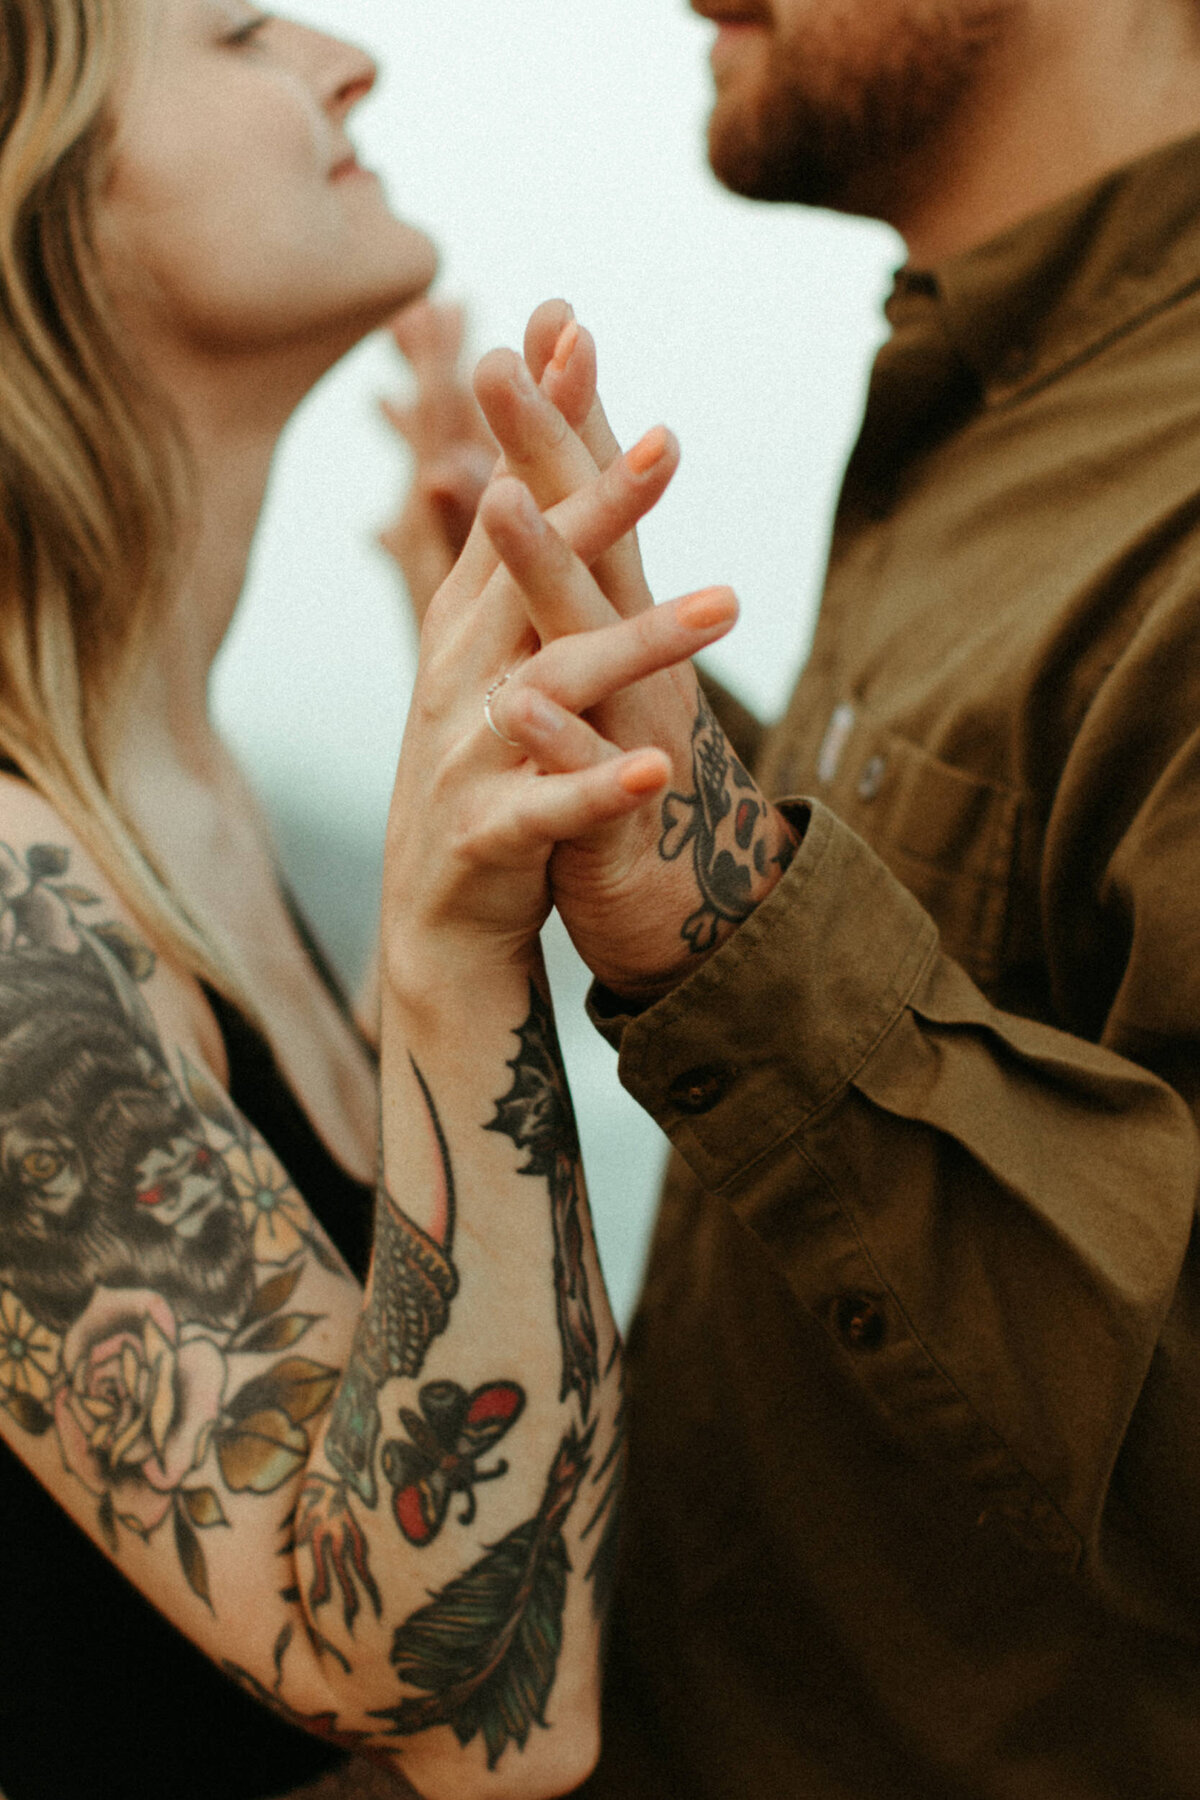 A guy and a girl with tattoos stand facing each other with their fingers intertwined.